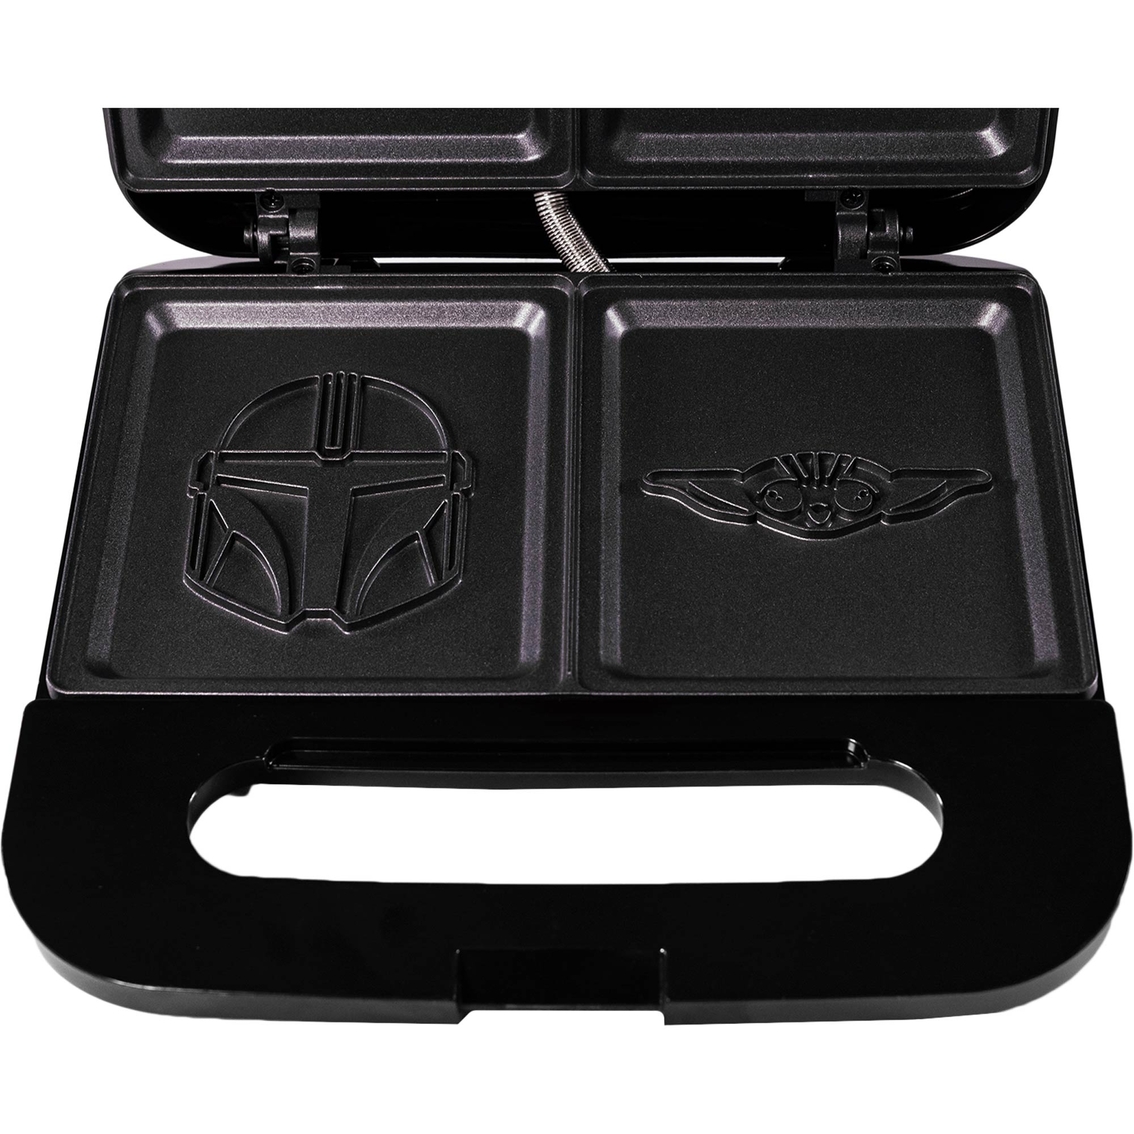 The Mandalorian Grilled Cheese Maker - Image 2 of 9